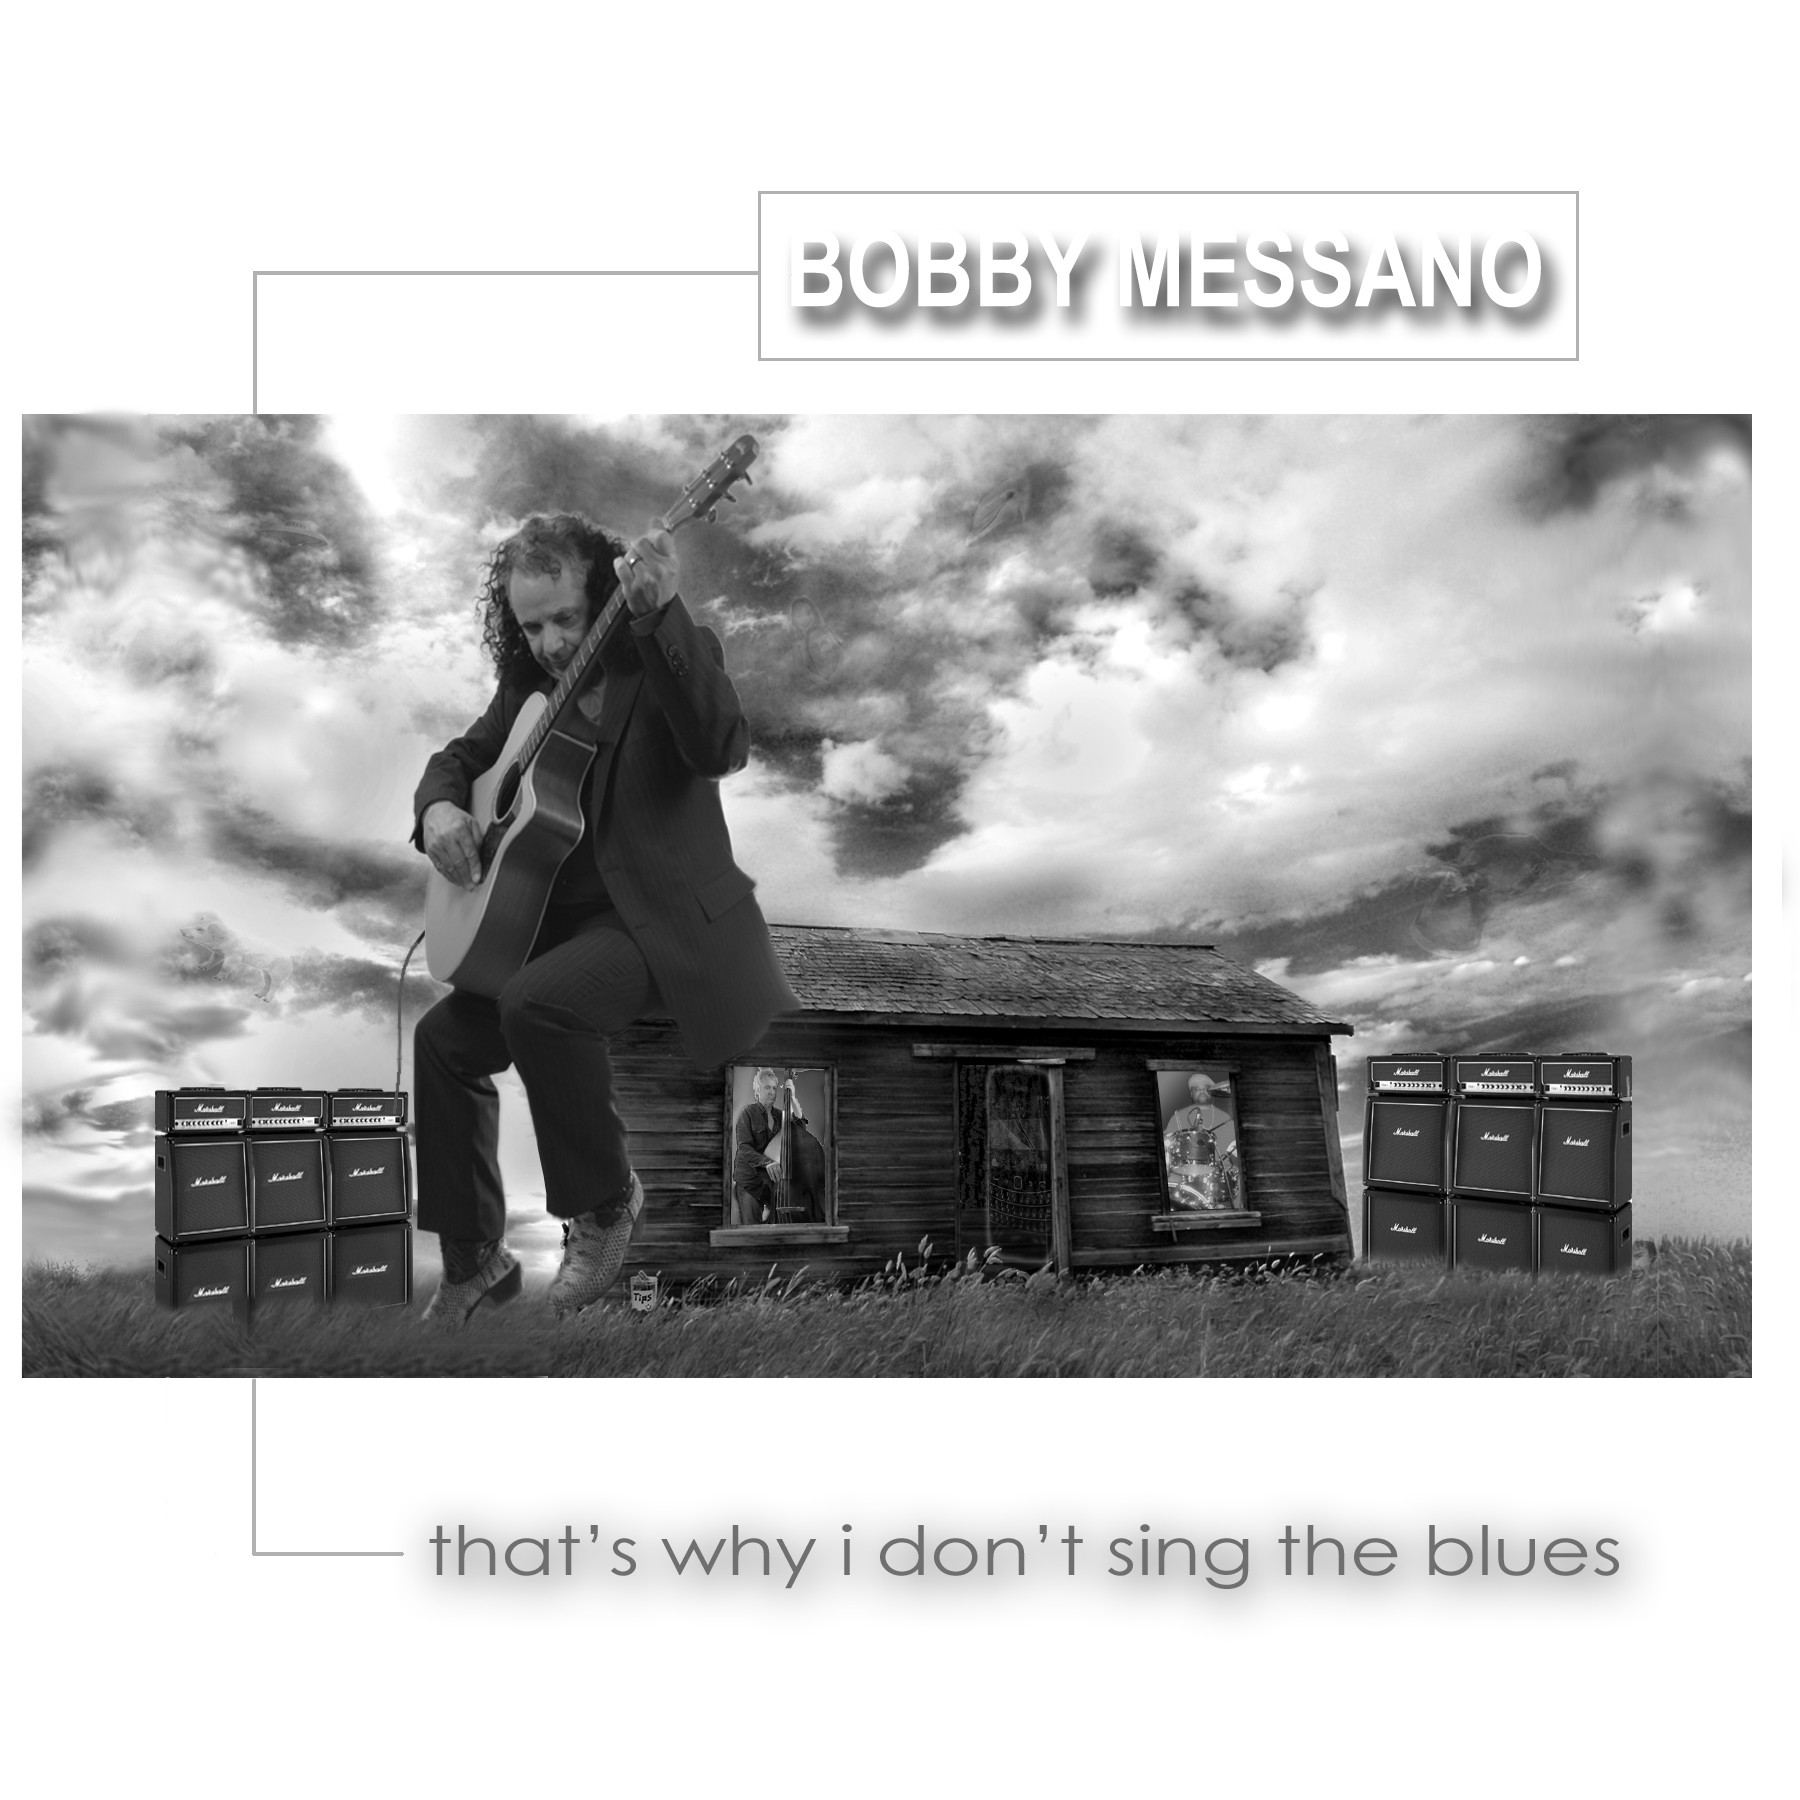 Singing the blues. Why i Sing the Blues. Обложка альбом Bobby Messano - Holdin' ground. Bobby Messano Википедия. Bobby Messano & NBO - Dominion Road.